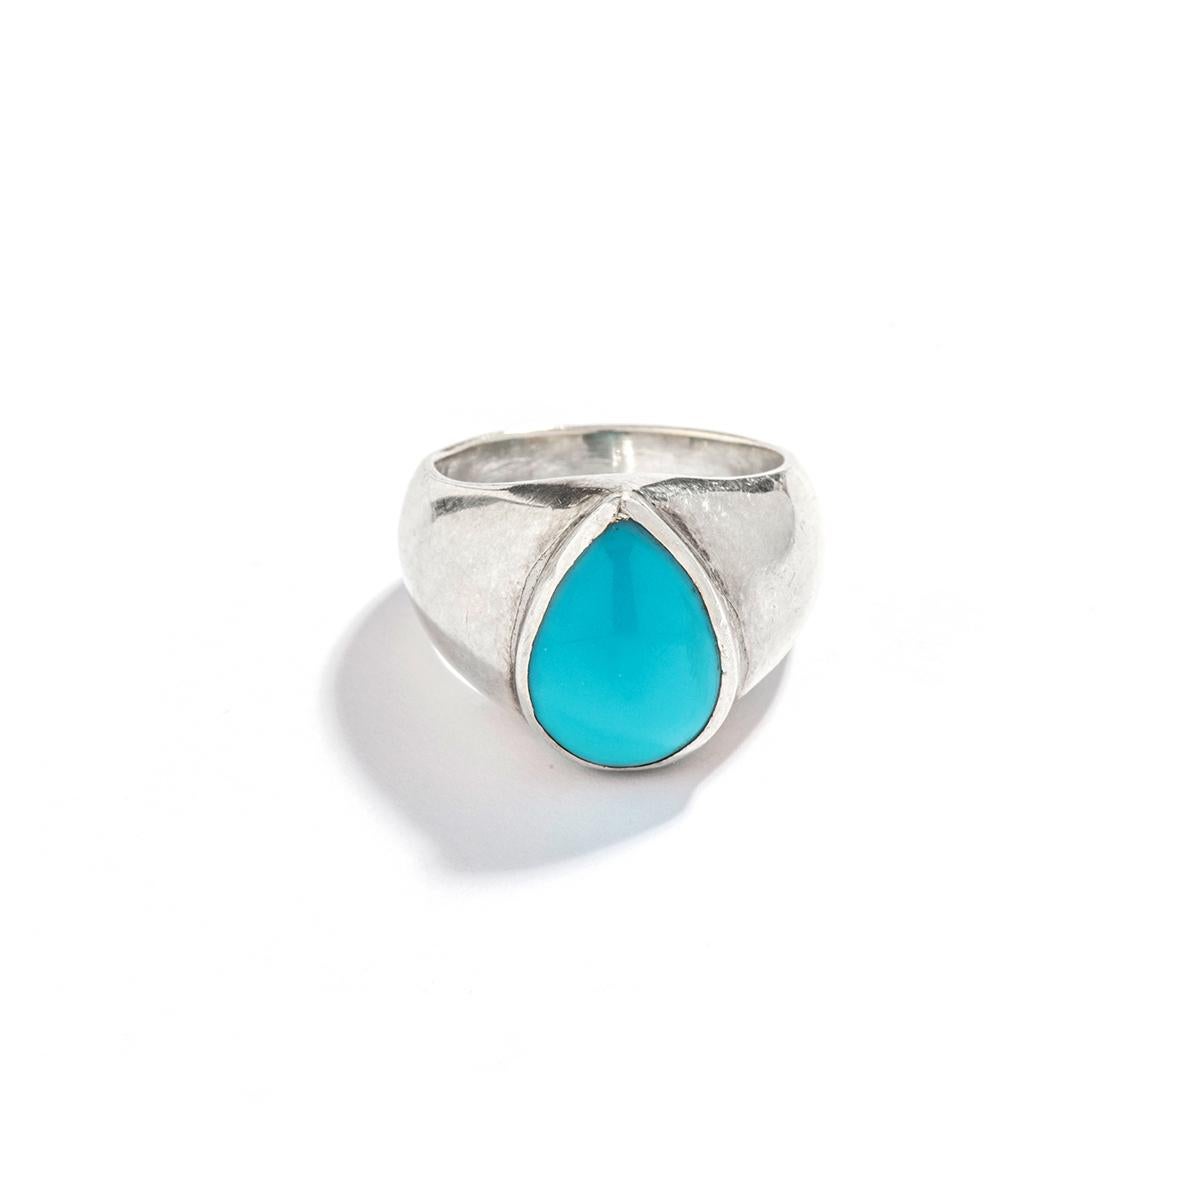 Turquoise Natural pear shape on Silver Ring.

Turquoise size: 0.59 inches (15.00 millimeters).
0.47 inch (12.00 millimeters).